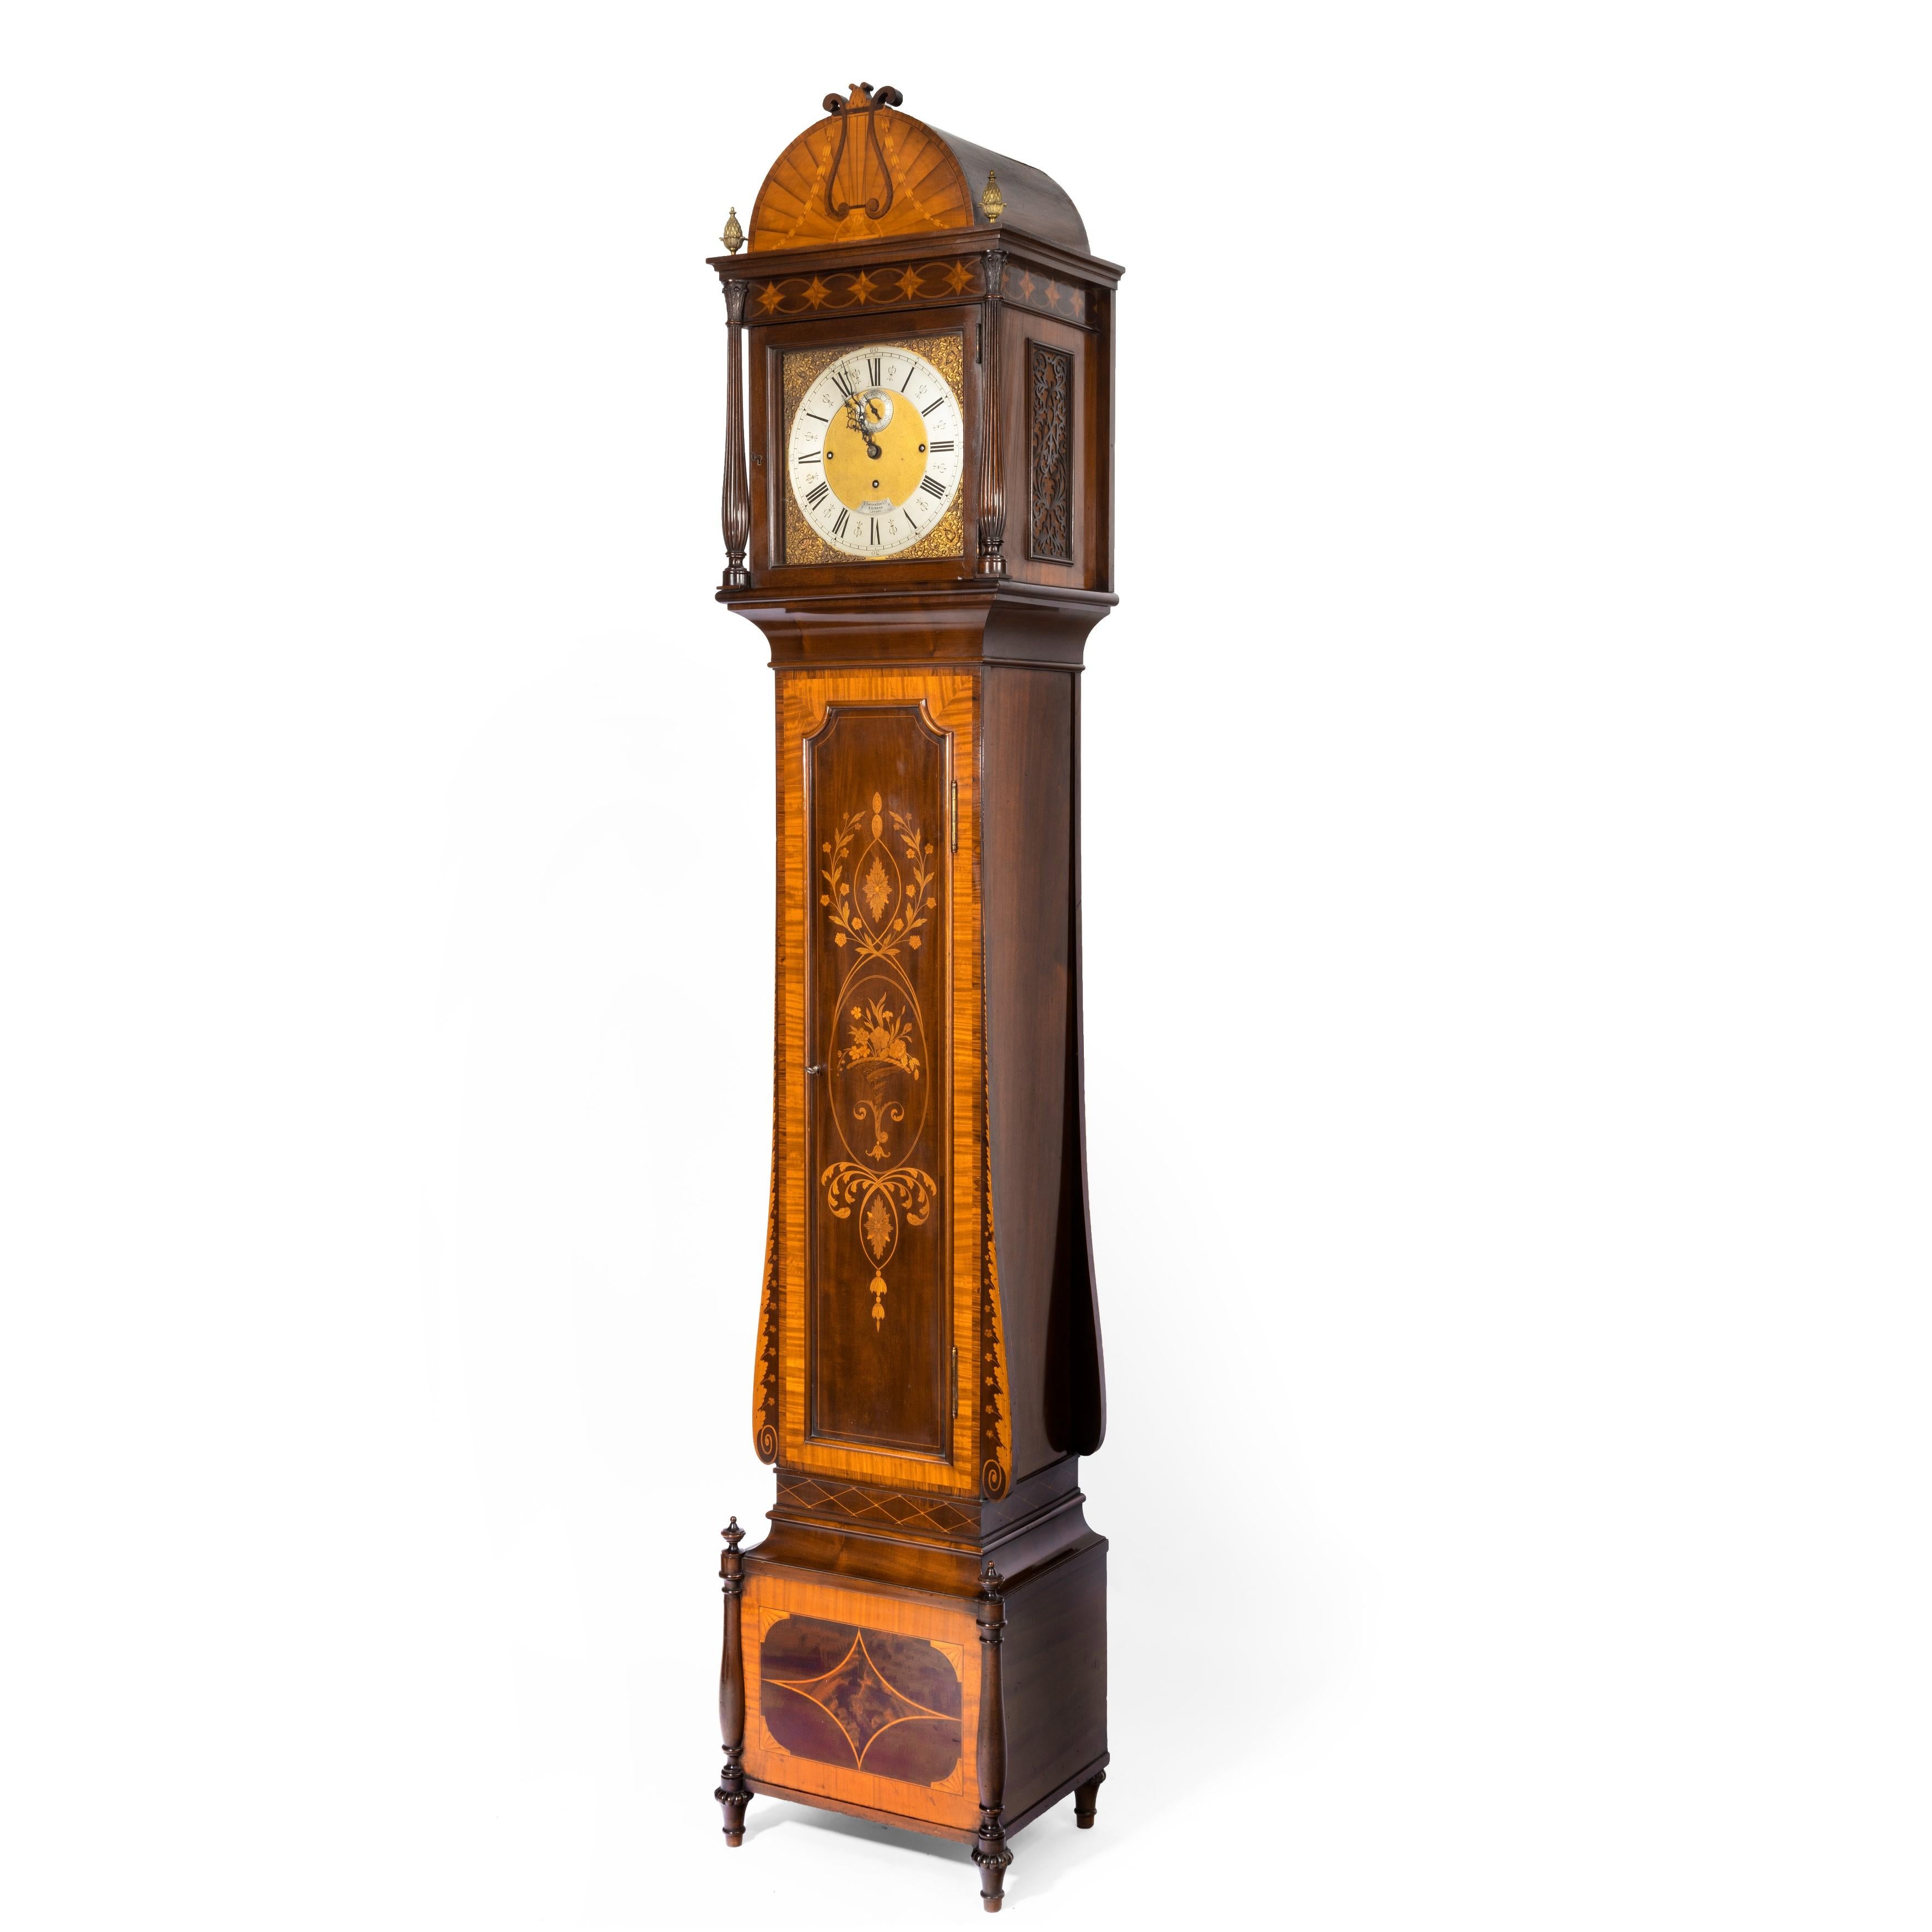 An unusual flame mahogany long-case clock attributed to Maples with a Smith & Sons 3-train movement, the case with a stepped base, the hood with two fluted columns and brass finials surmounted by a hemi-spherical crest decorated with a lyre against